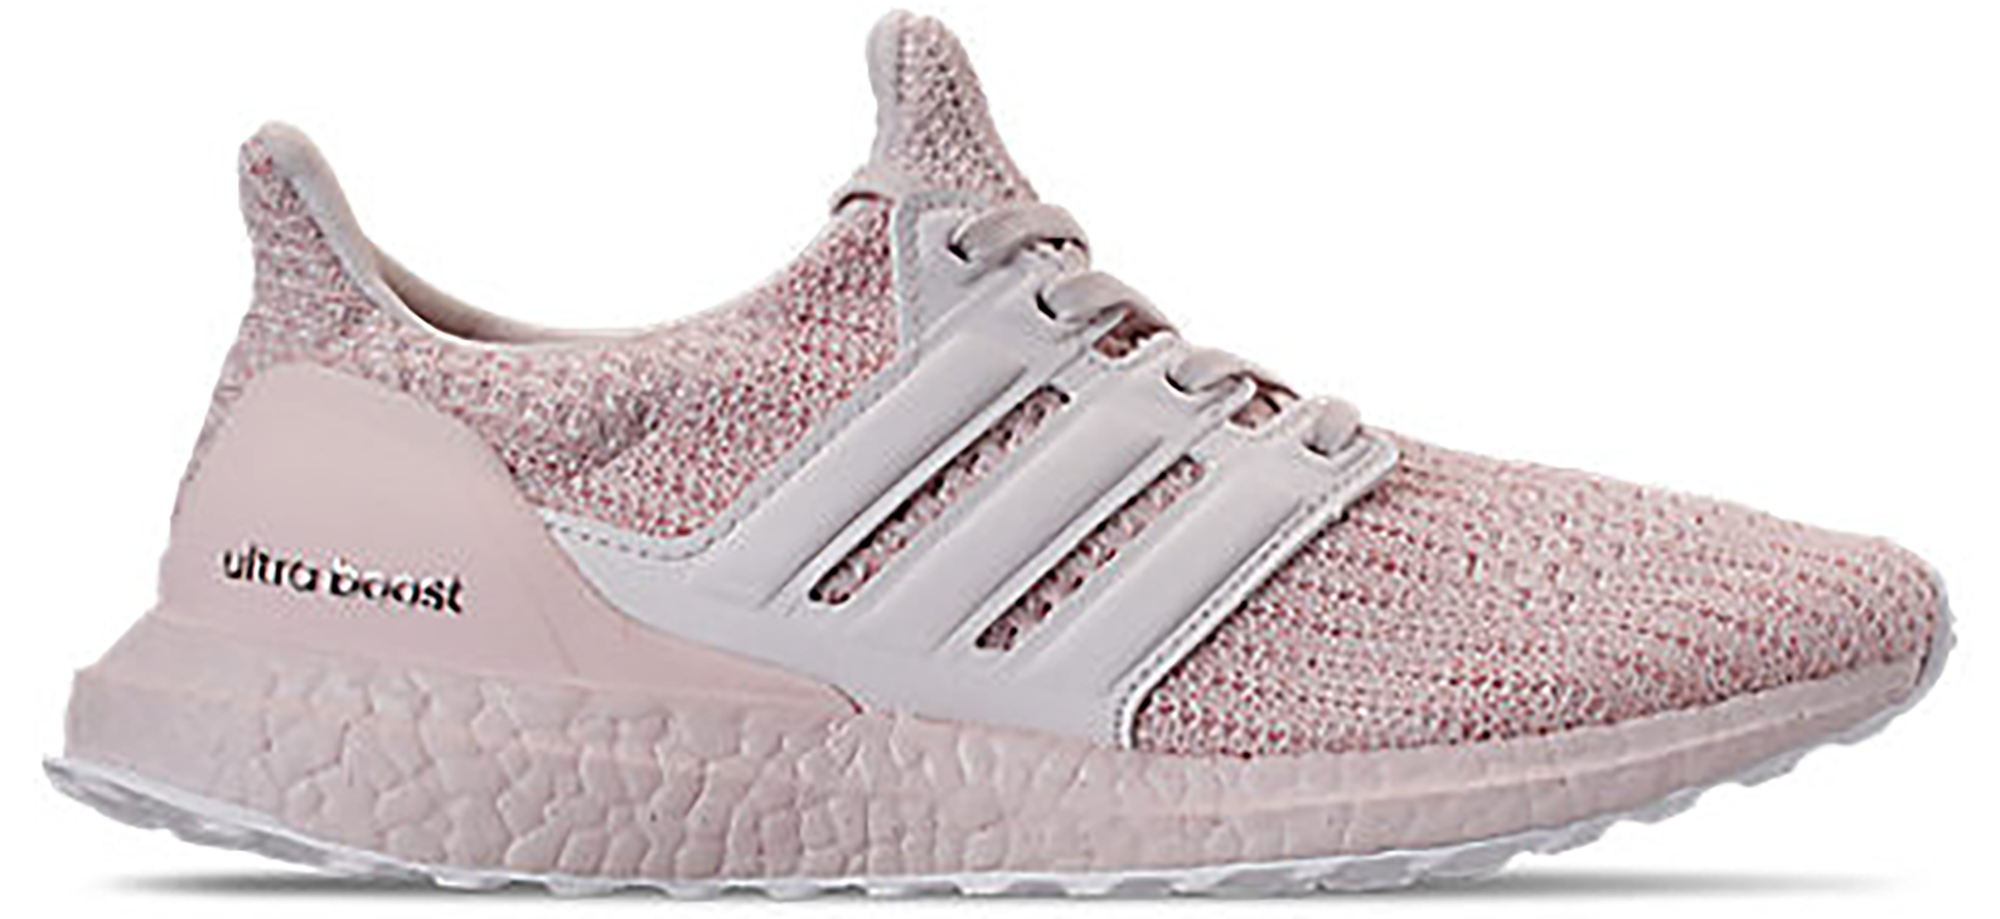 adidas ultra boost orchid pink